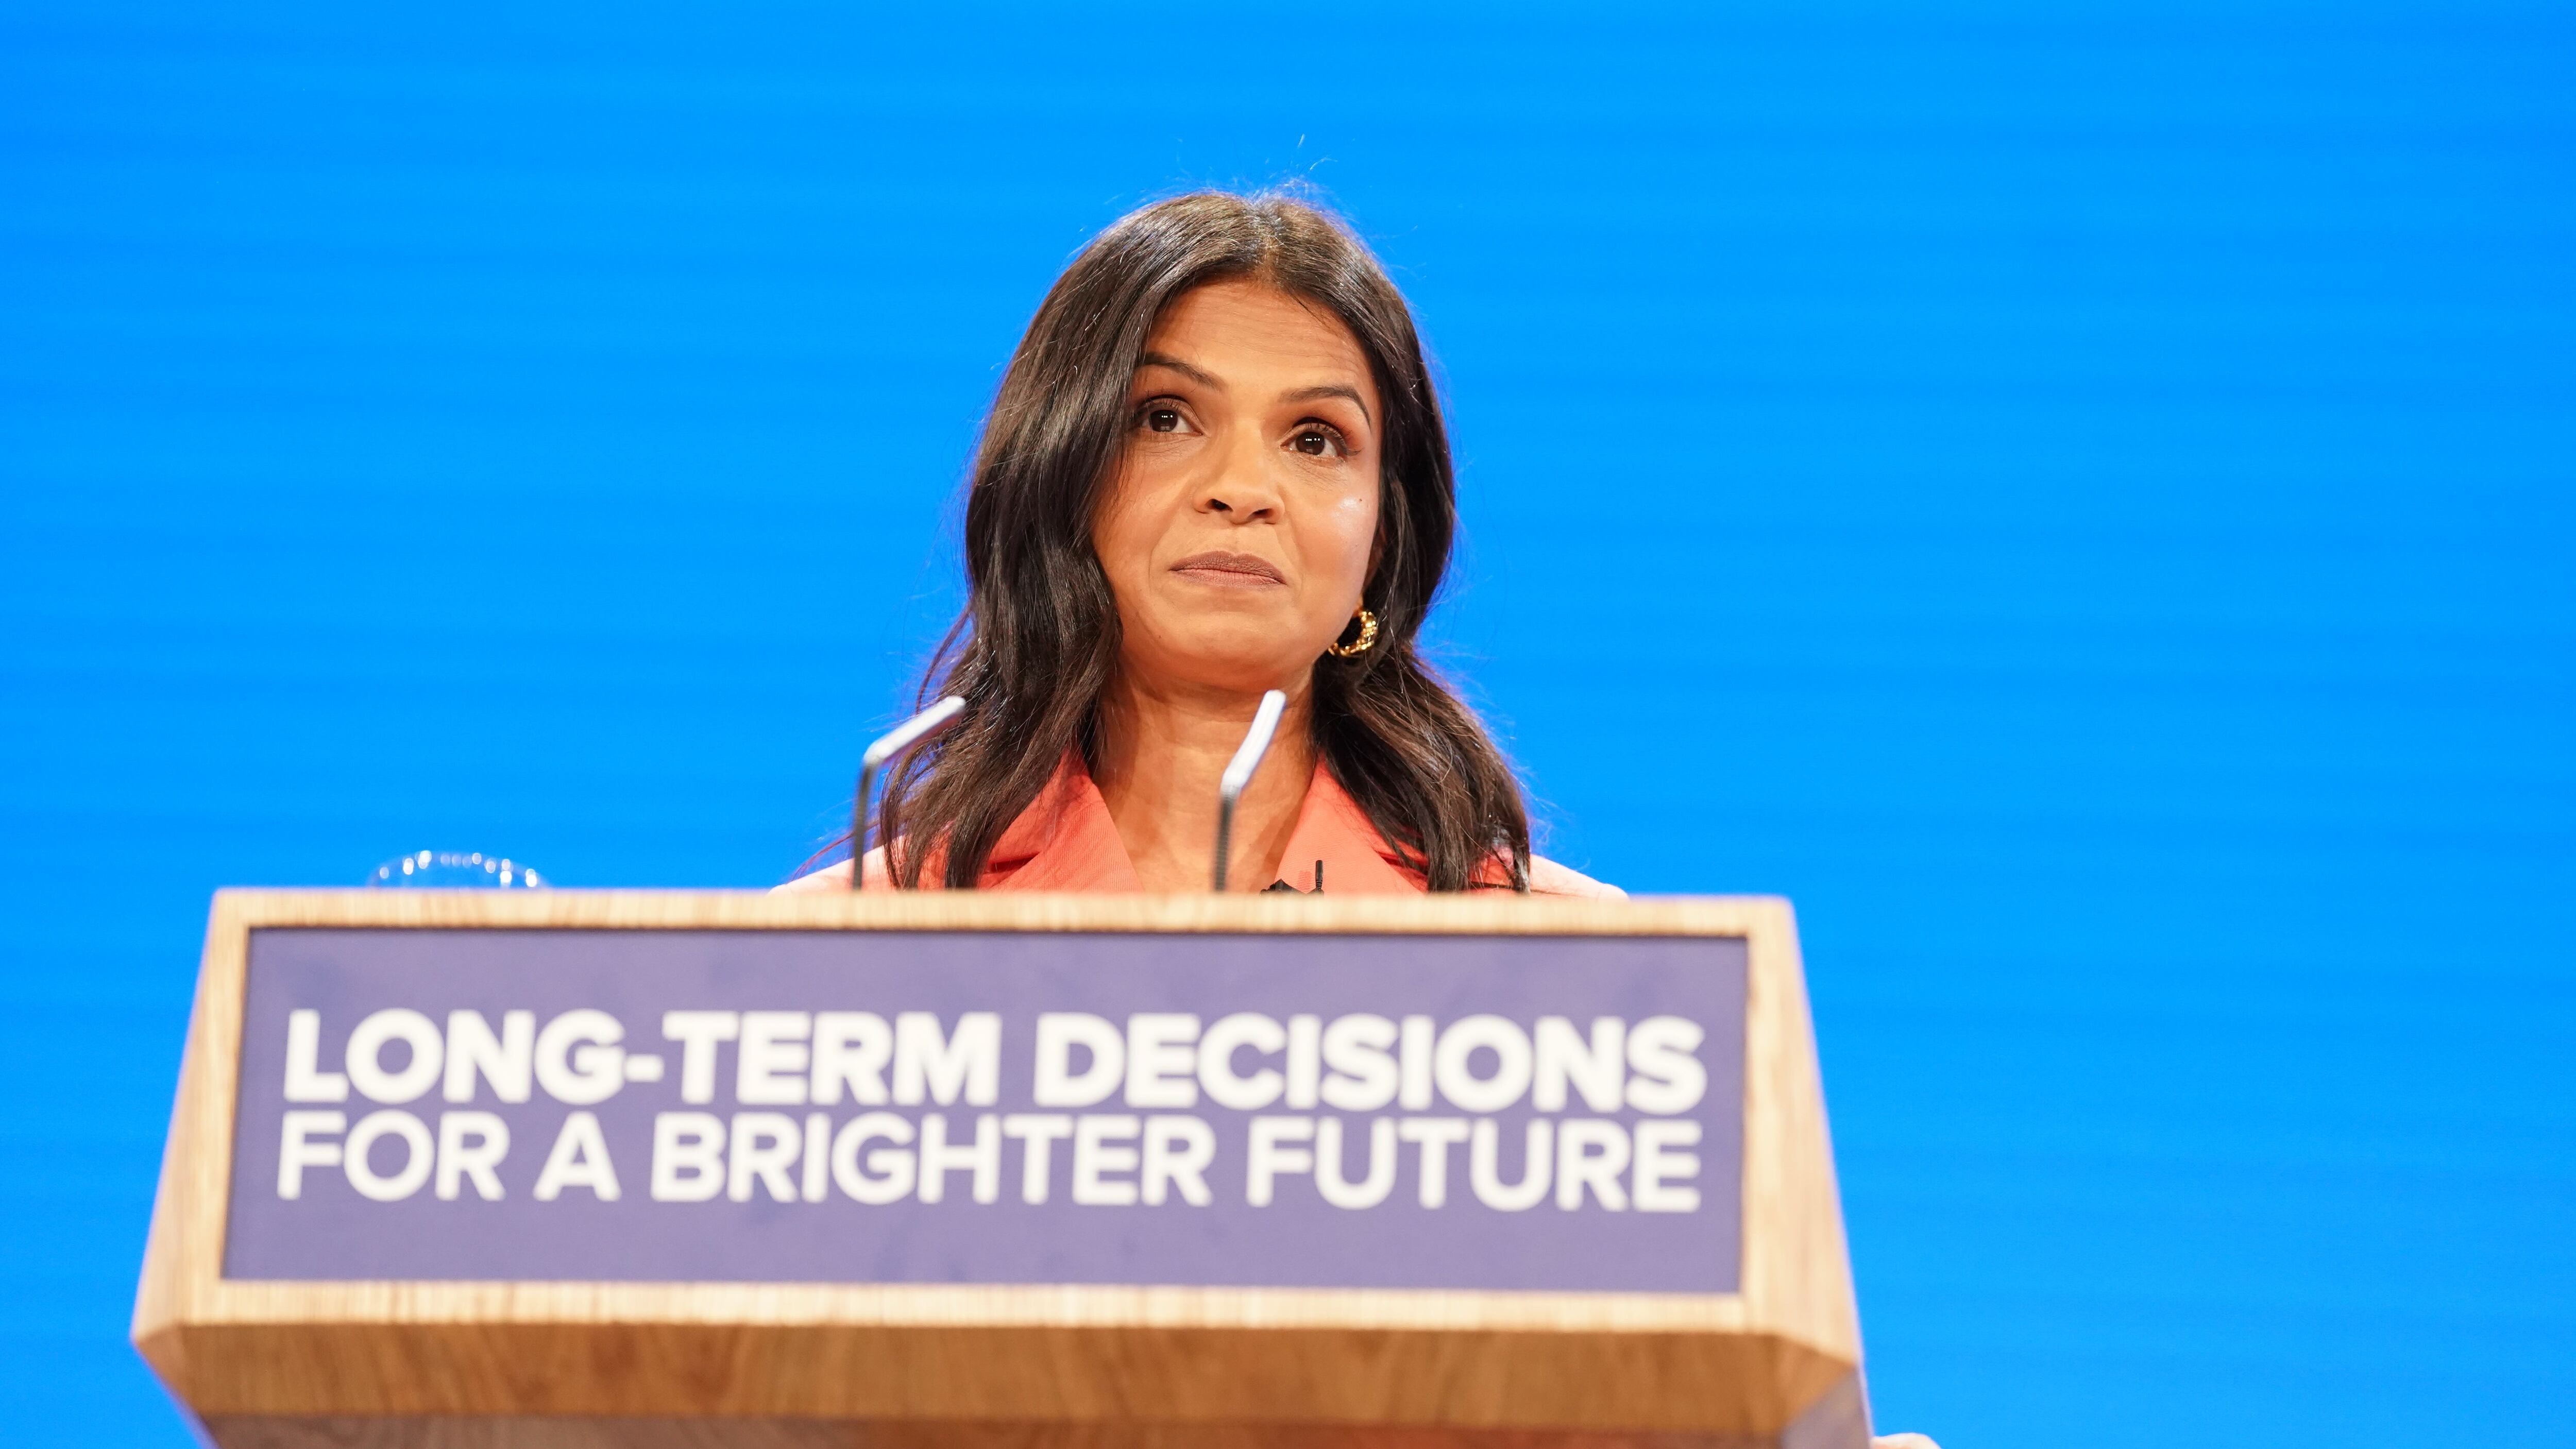 Akshata Murty, the wife of Prime Minister Rishi Sunak, speaks on stage during the Conservative Party annual conference in Manchester (Stefan Rousseau/PA)